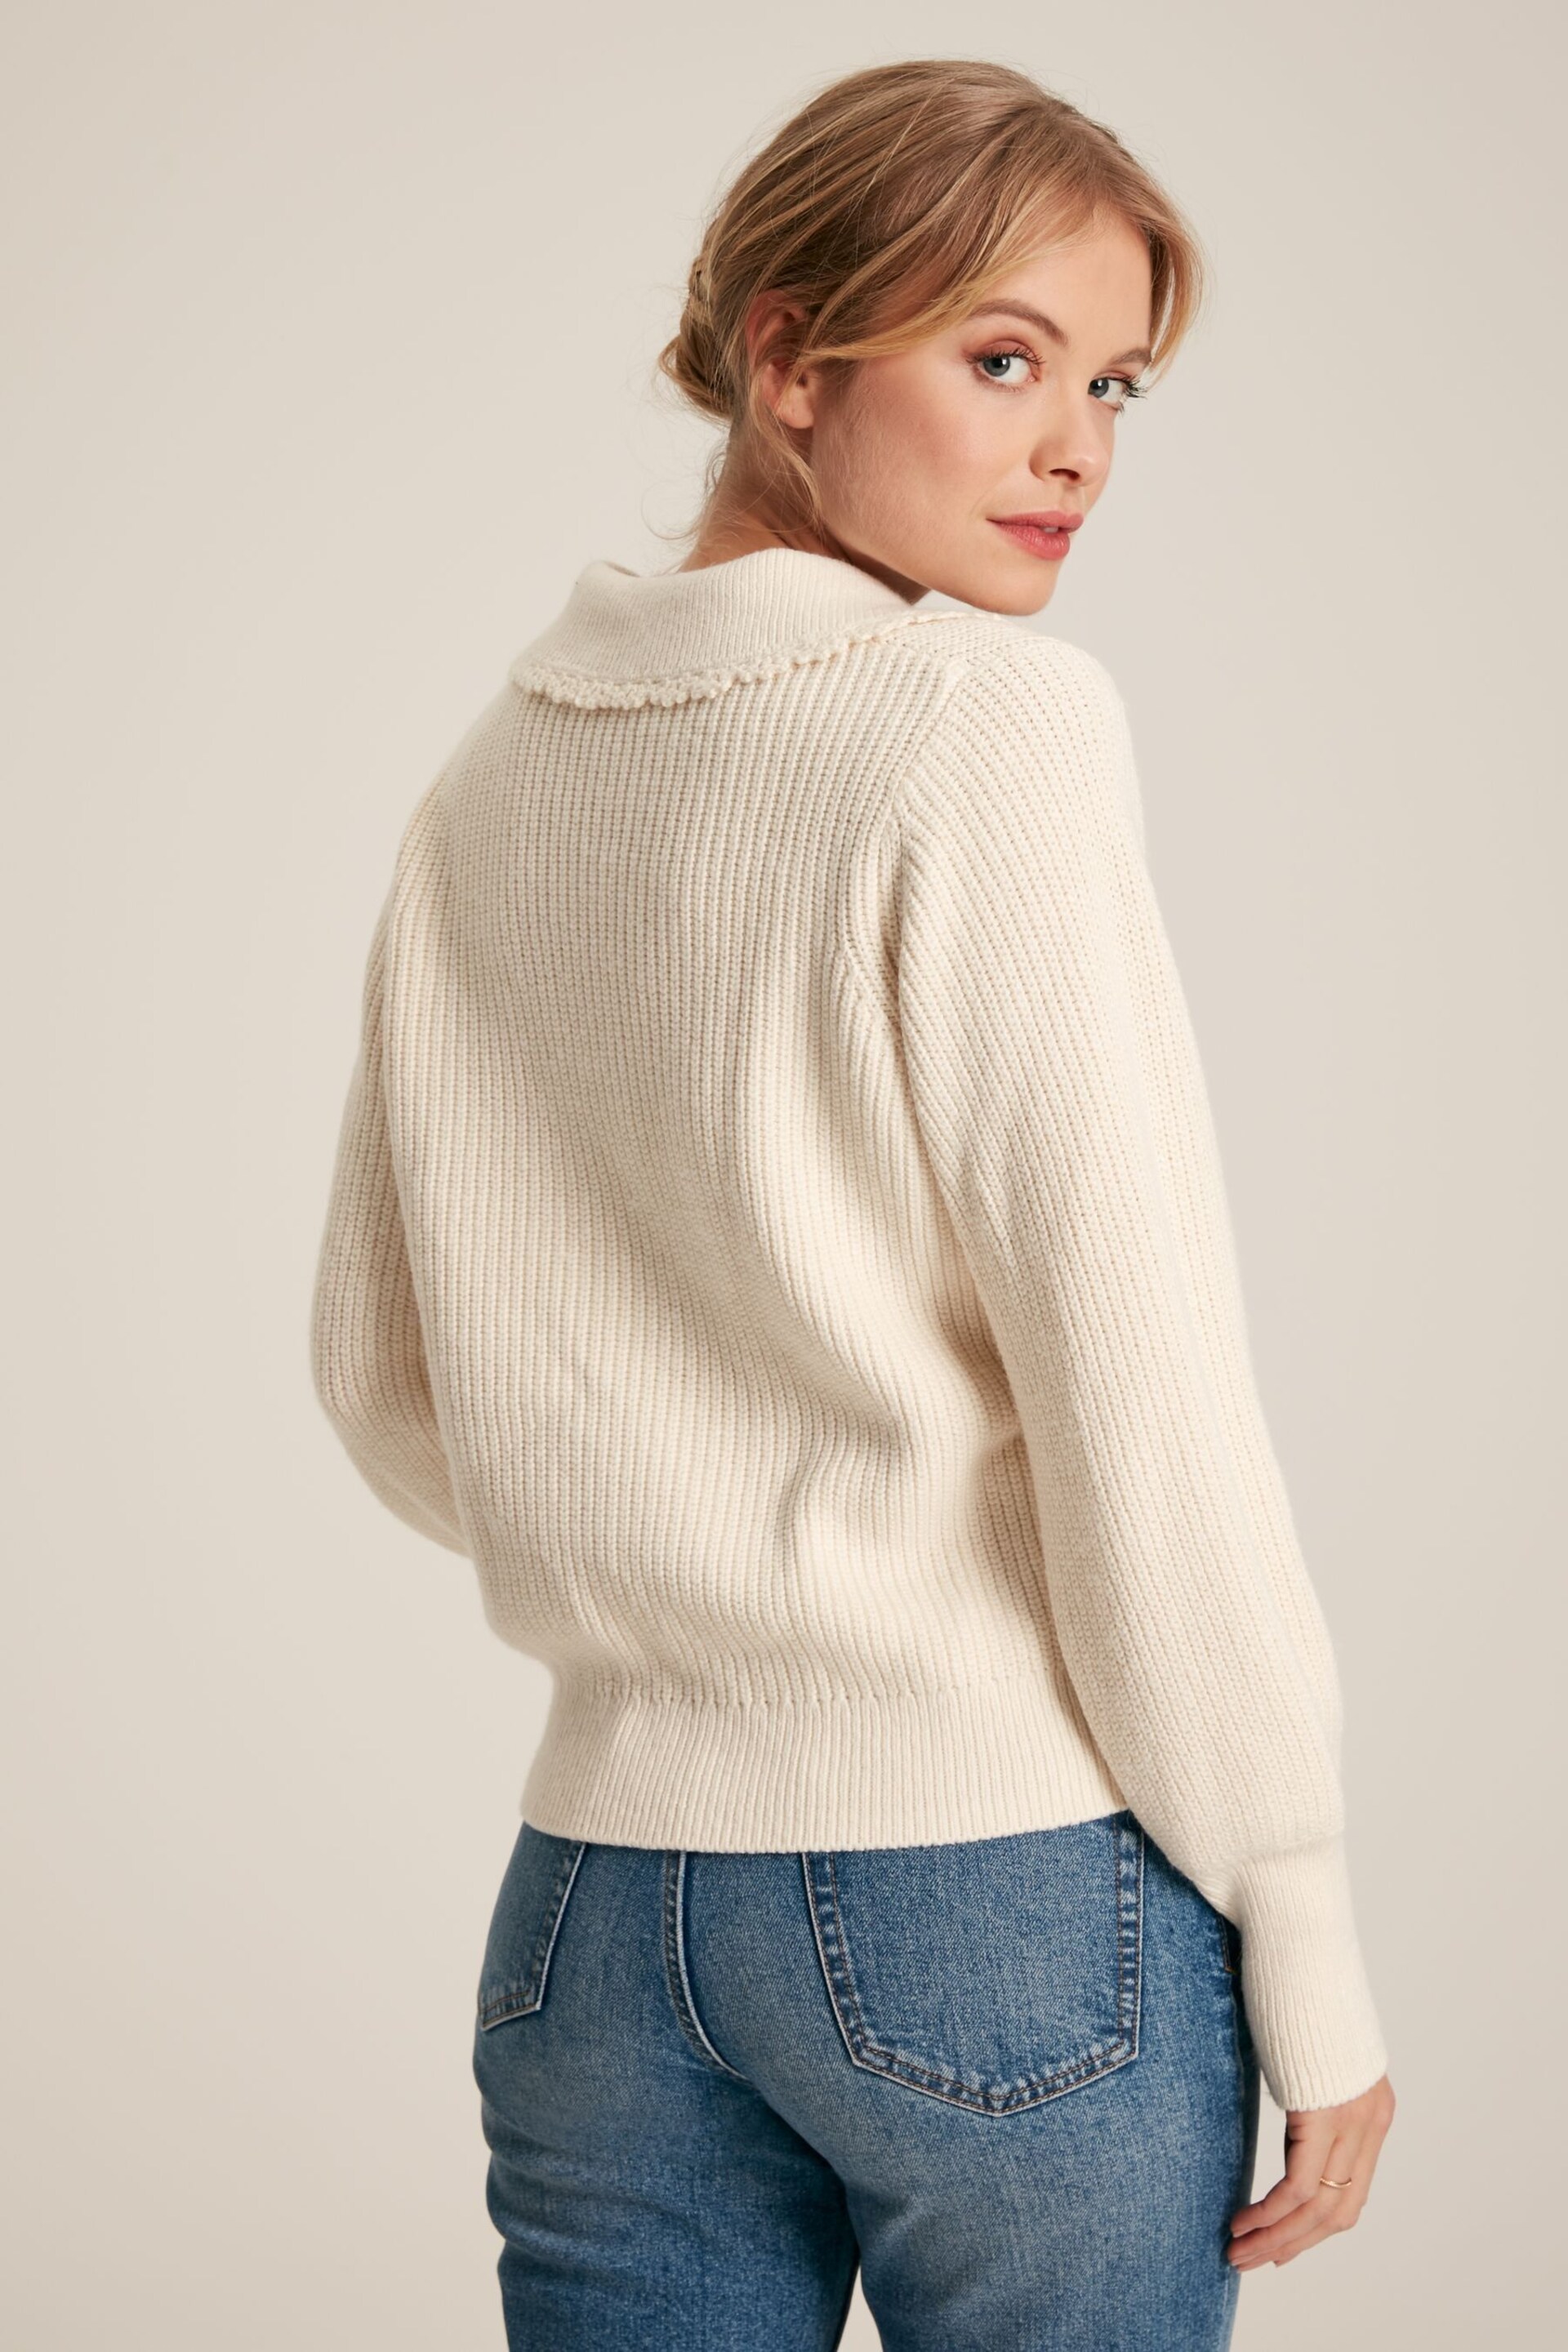 Joules Evangeline Cream Rib Knit Jumper With Crochet Collar - Image 2 of 7